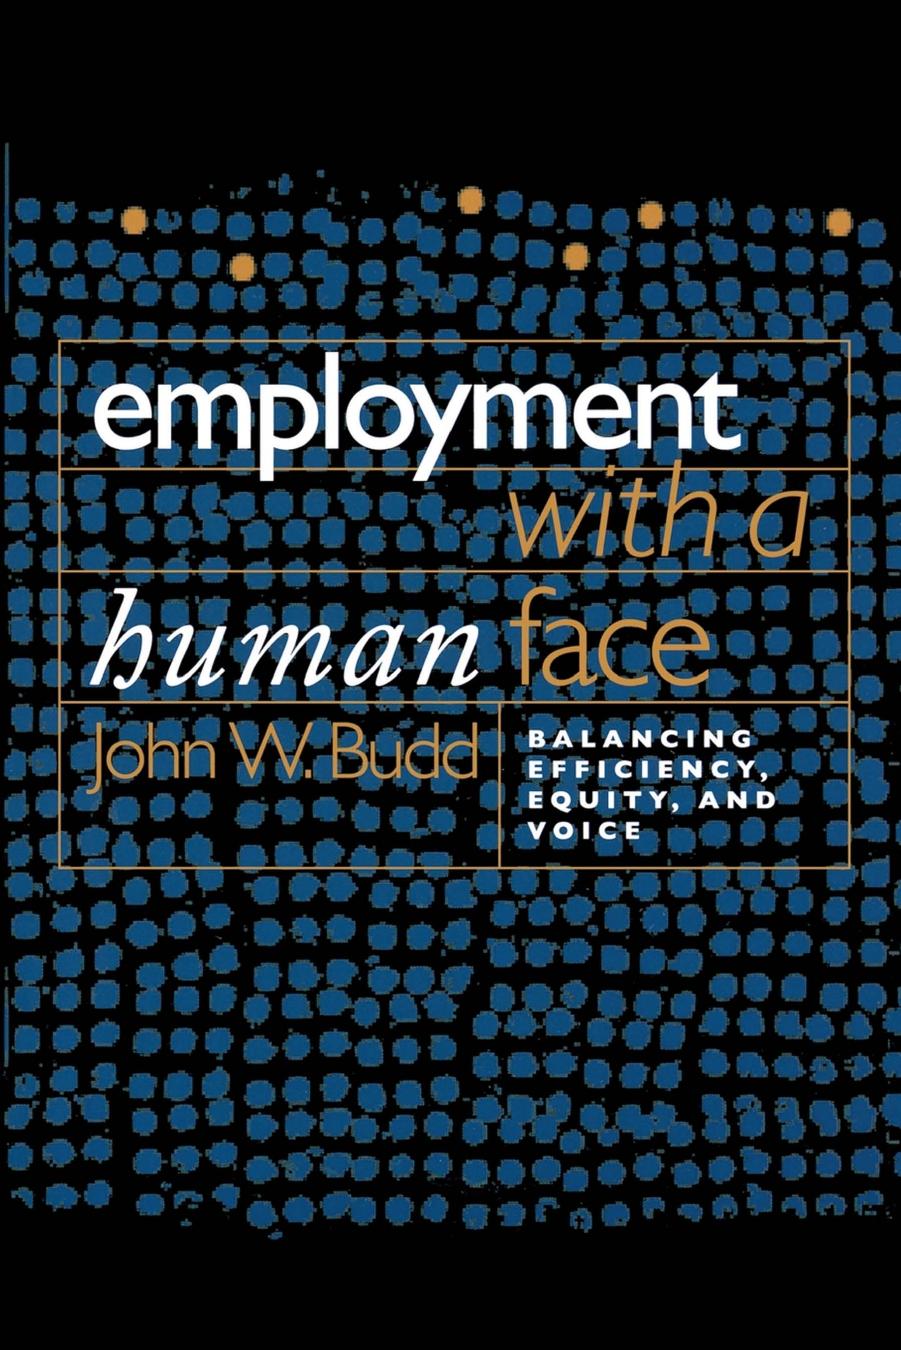 Employment with a Human Face: Balancing Efficiency, Equity, and Voice by John W. Budd